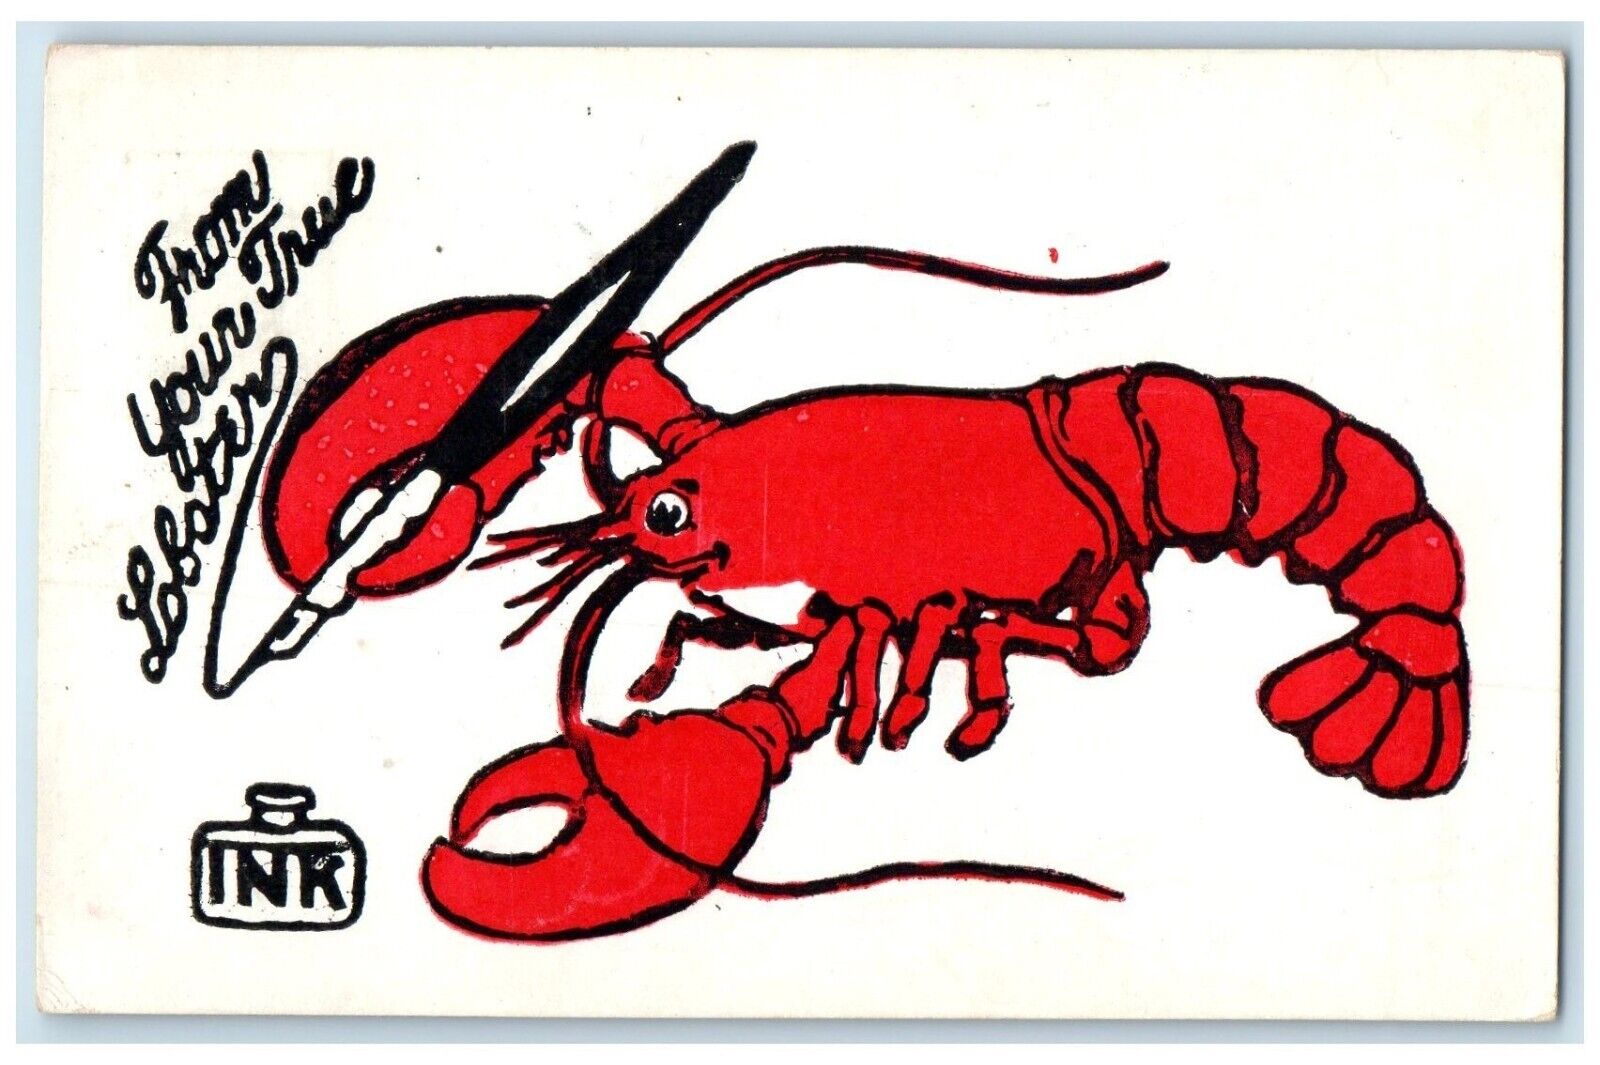 1908 From Your True Lobster Ink Los Angeles California CA Antique Postcard